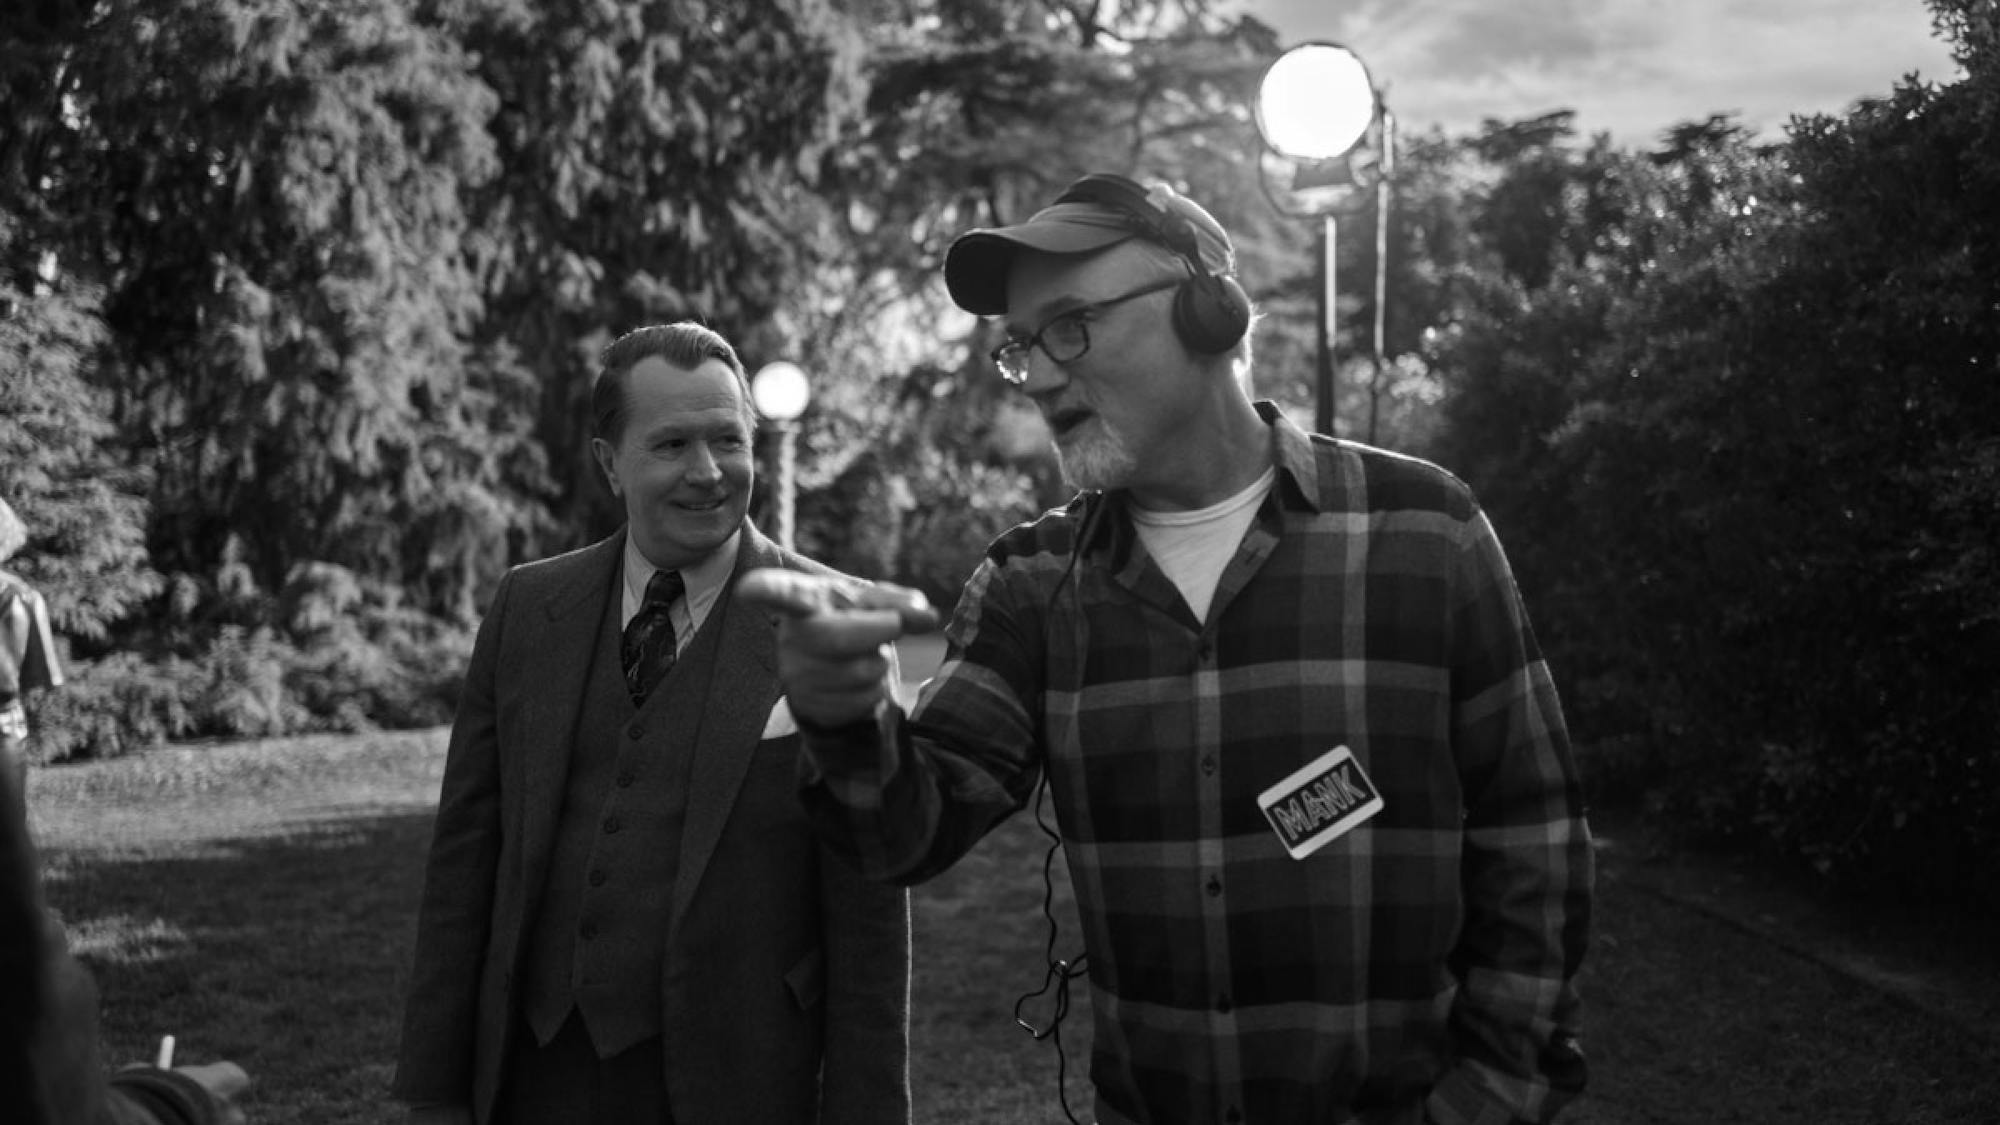 Fincher directs Oldman on the San Simeon set. Oldman is in costume in a suit, while Fincher sports headphones and a flannel shirt on which he’s stuck a sticker reading “Mank.”